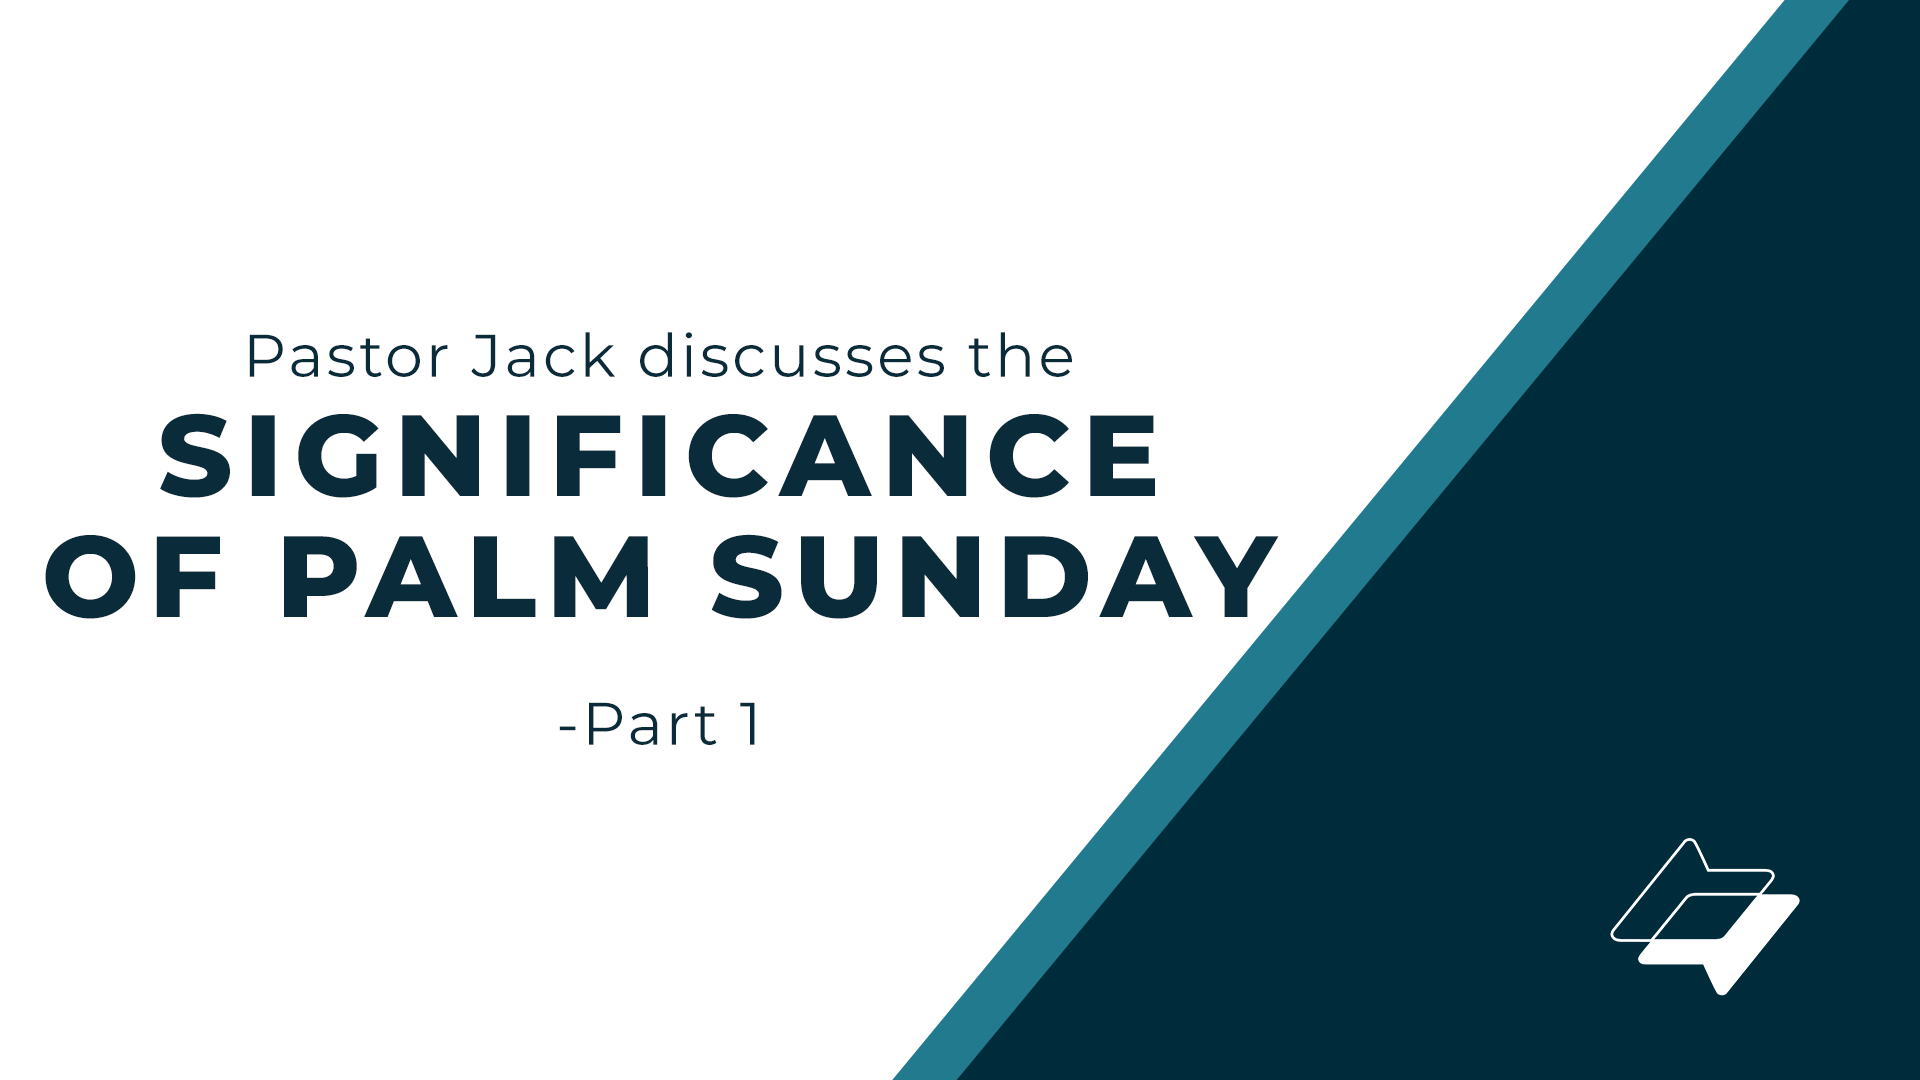 Pastor Jack discusses the significance of Palm Sunday – Part 1